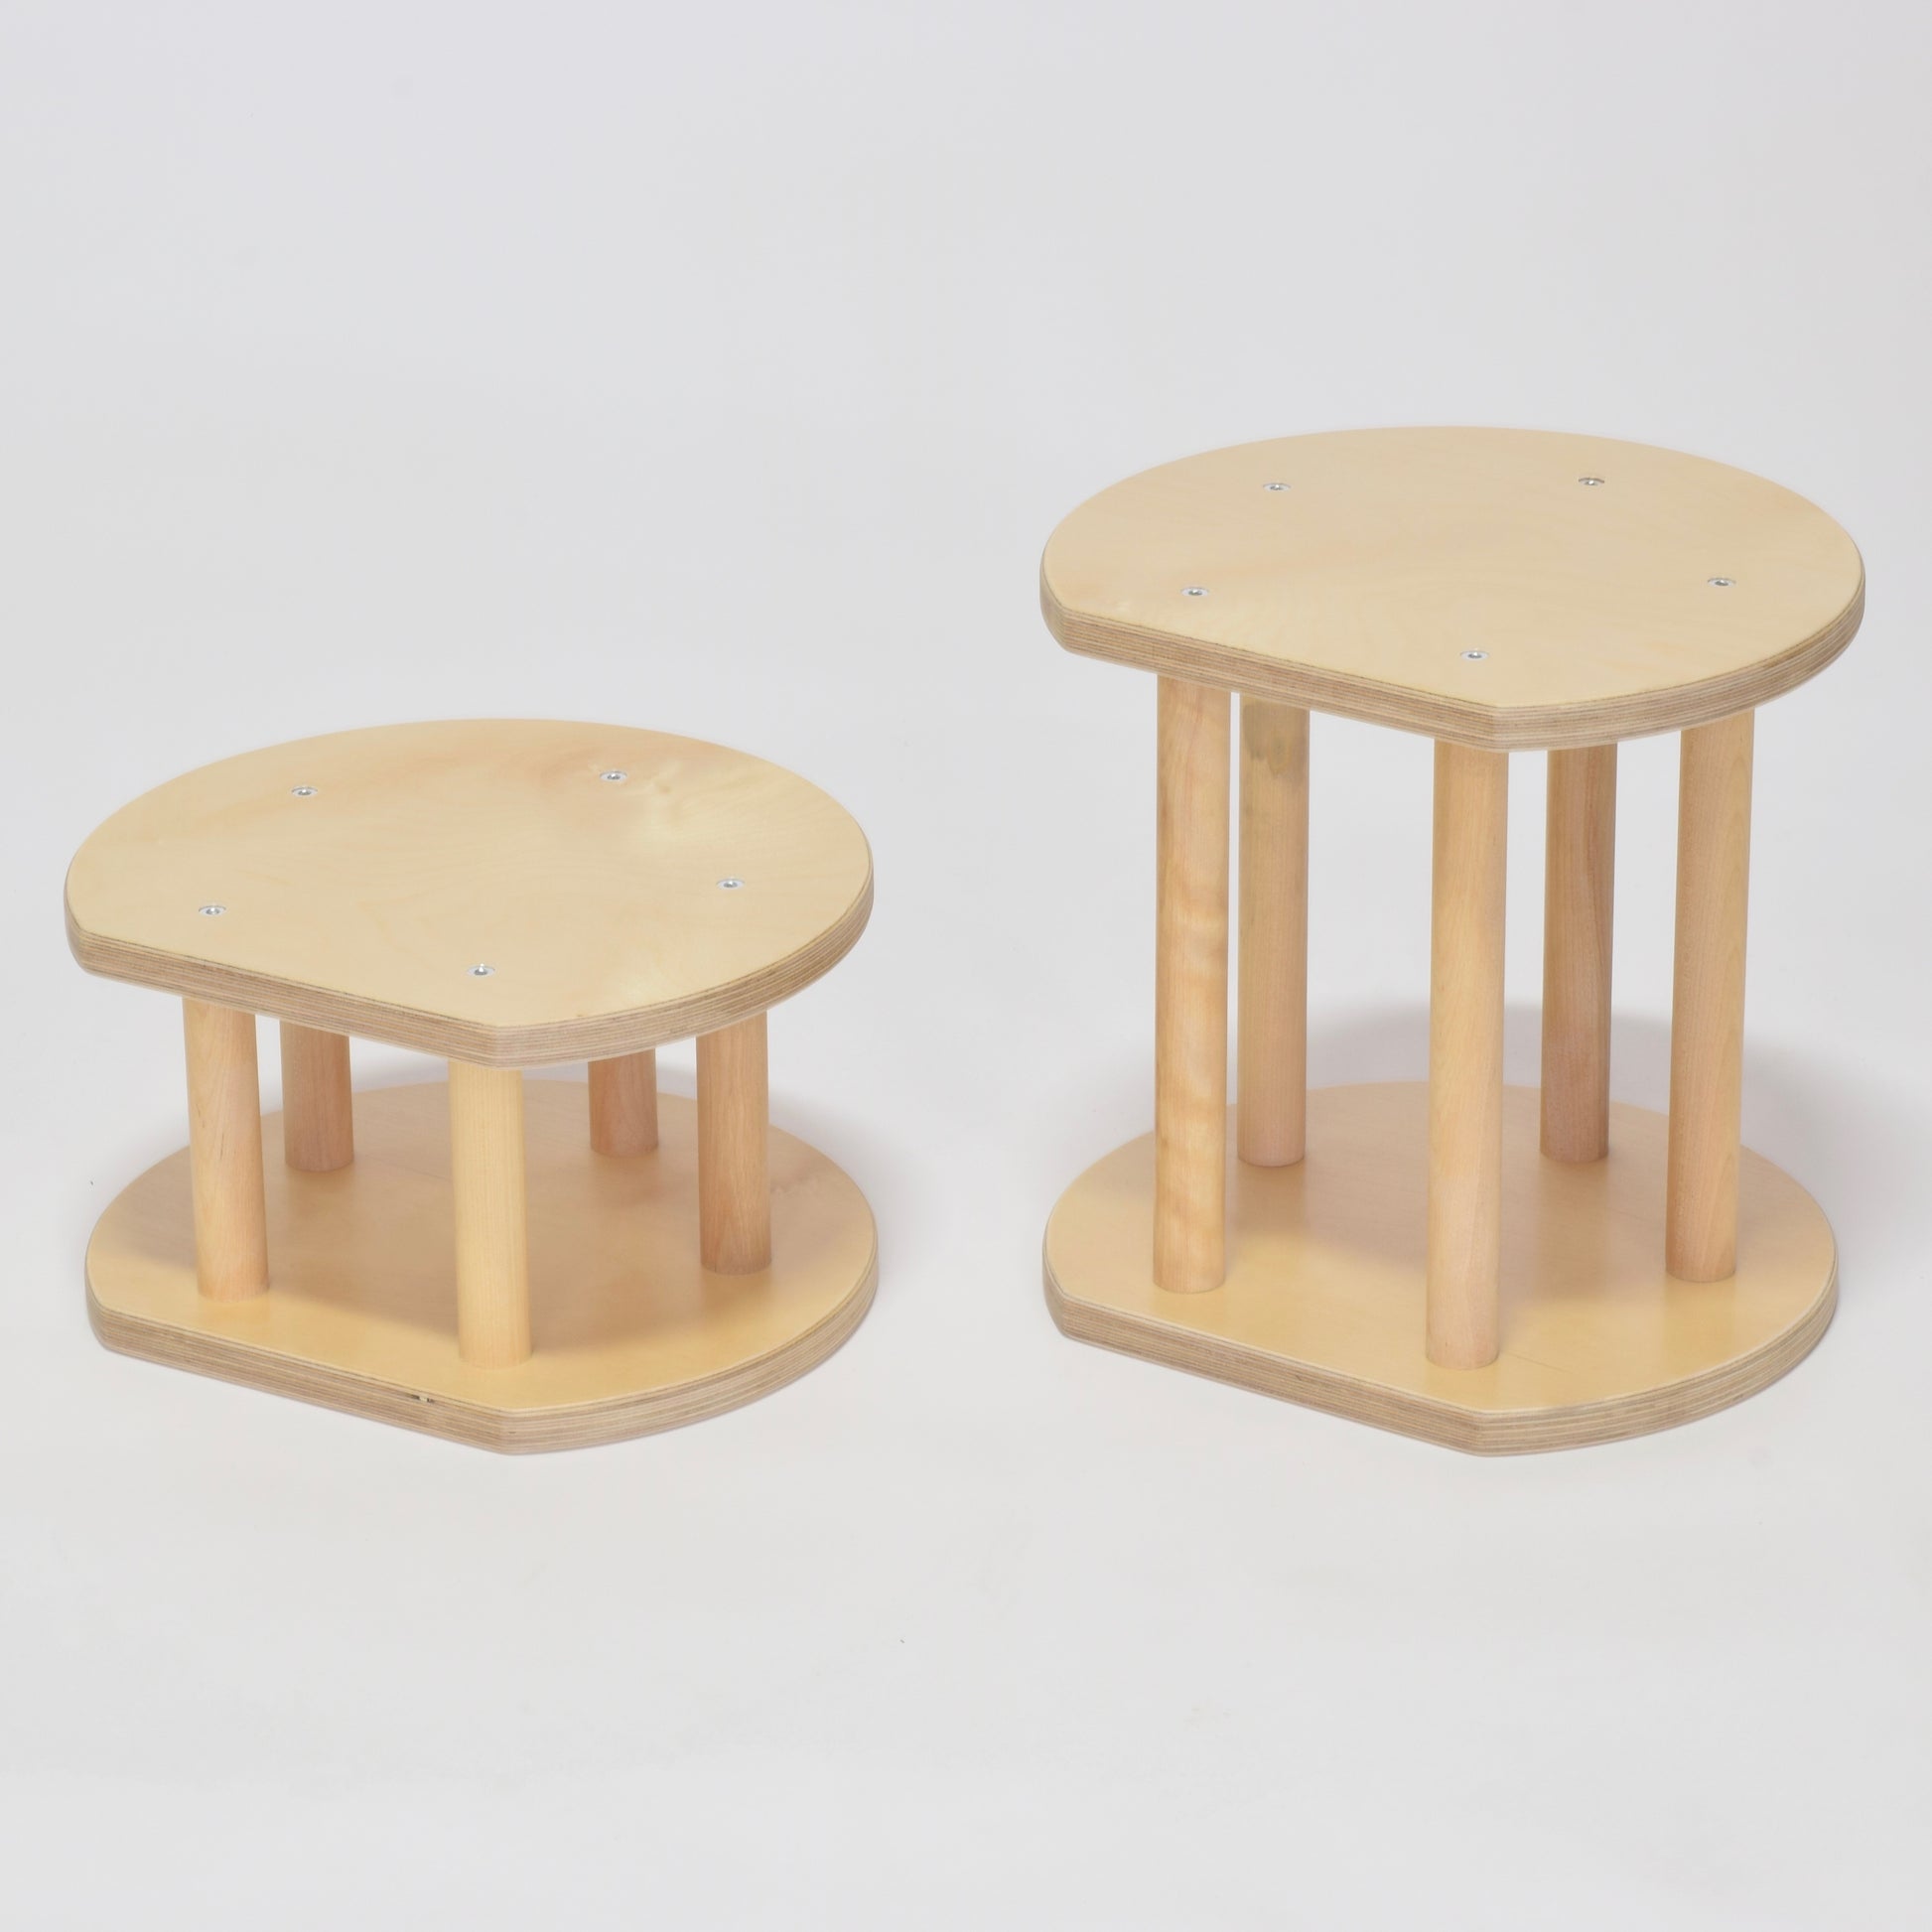 wooden stools for children at a discount